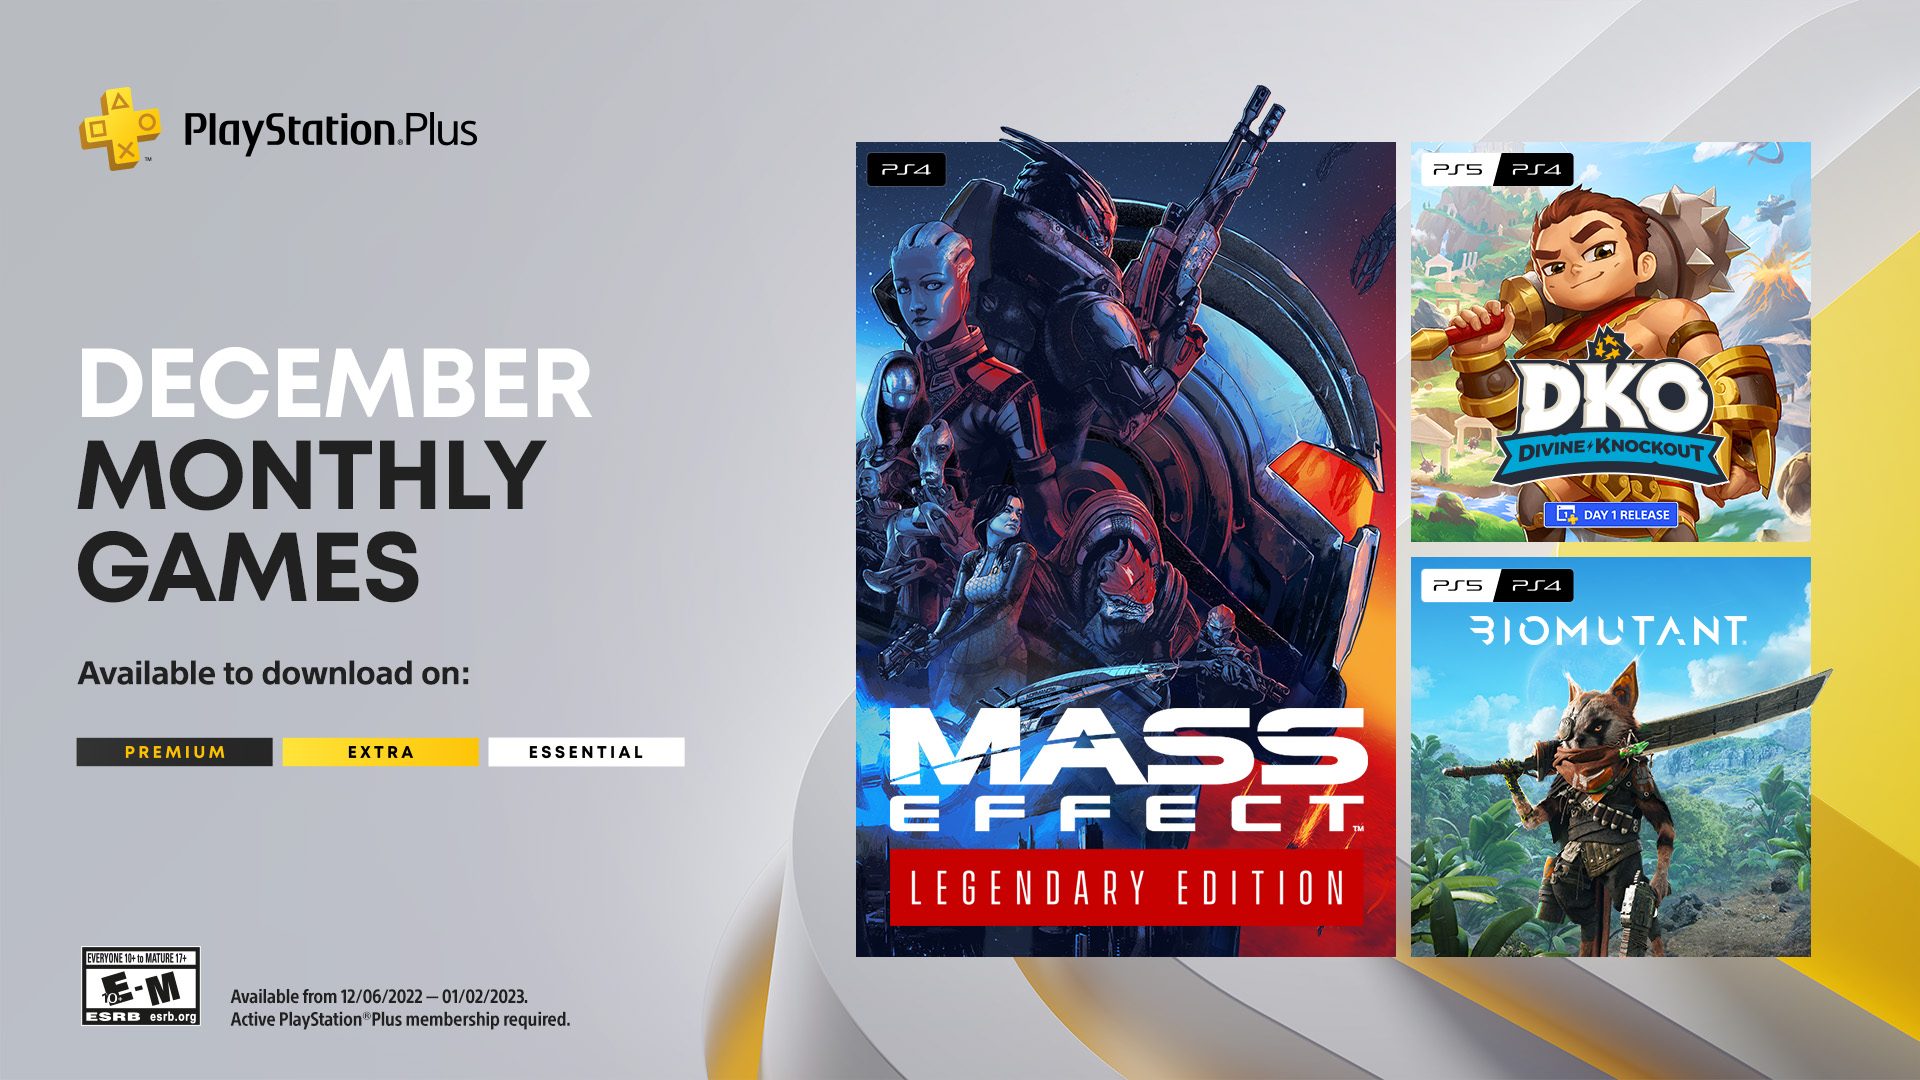 PlayStation Plus Monthly Games for December: Knockout: Founder's Edition, Legendary Edition, Biomutant – PlayStation.Blog